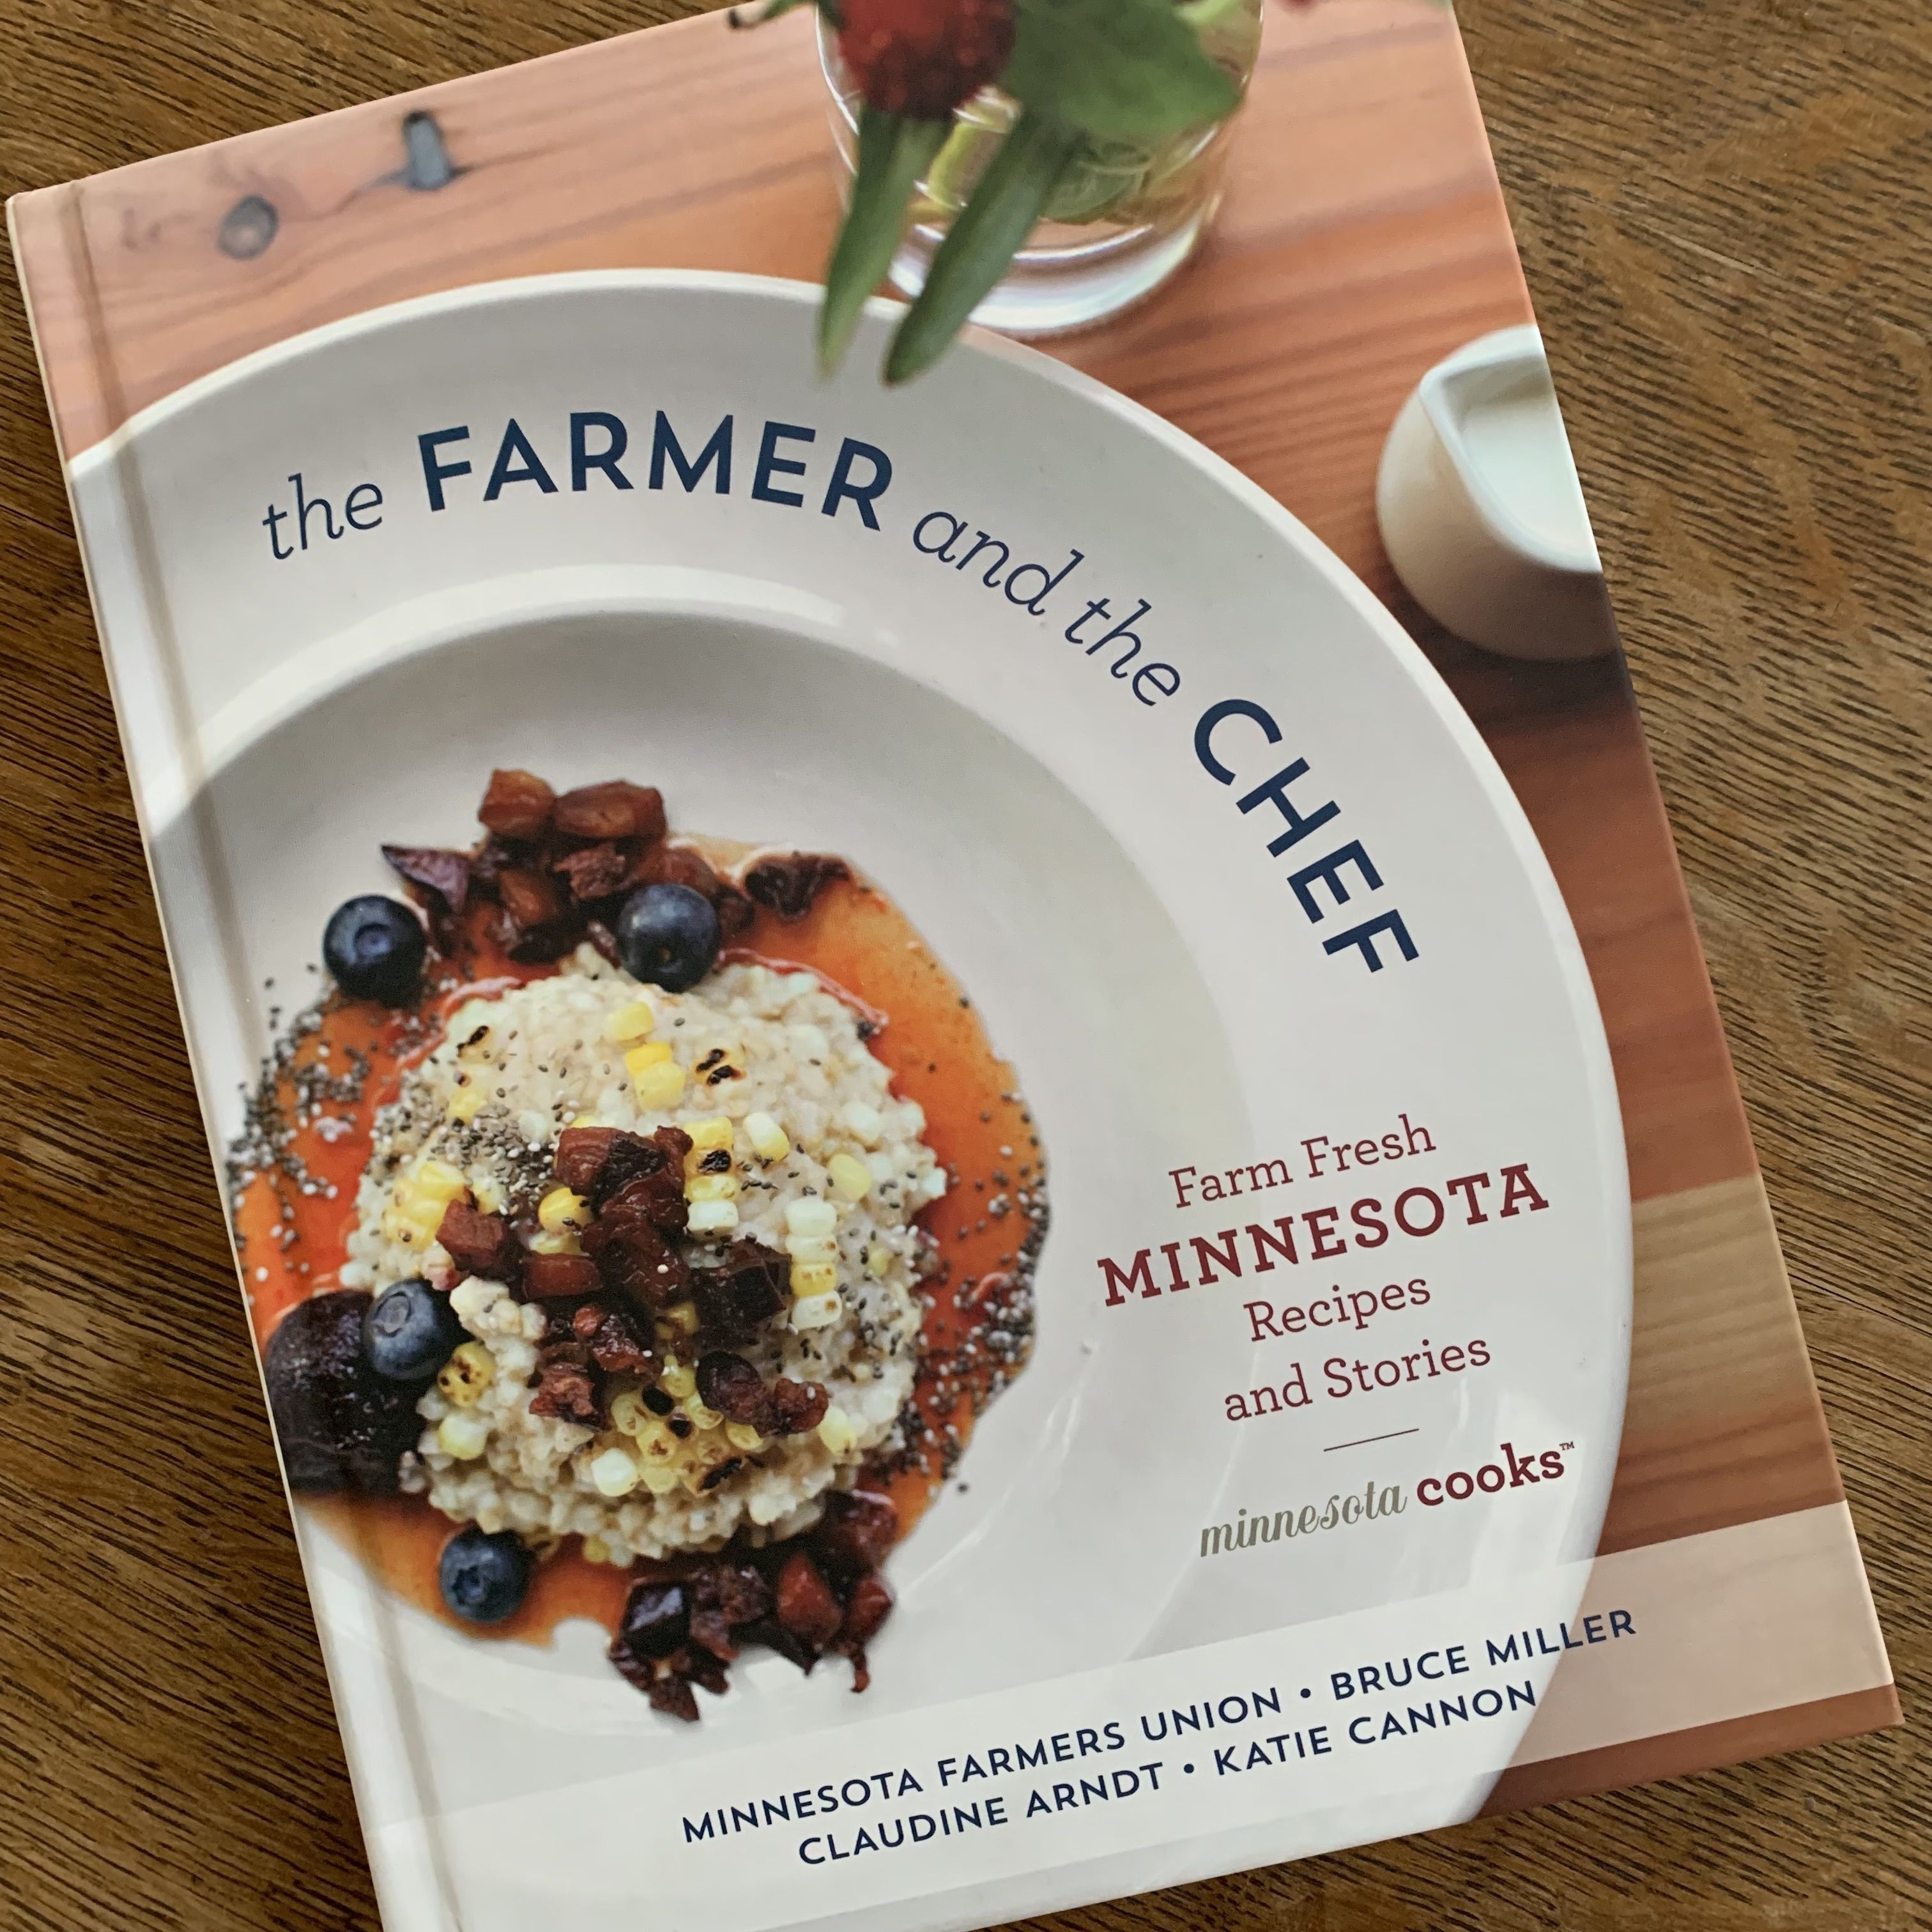 Book Review: "The Farmer and the Chef: Farm Fresh Minnesota Recipes and Stories"